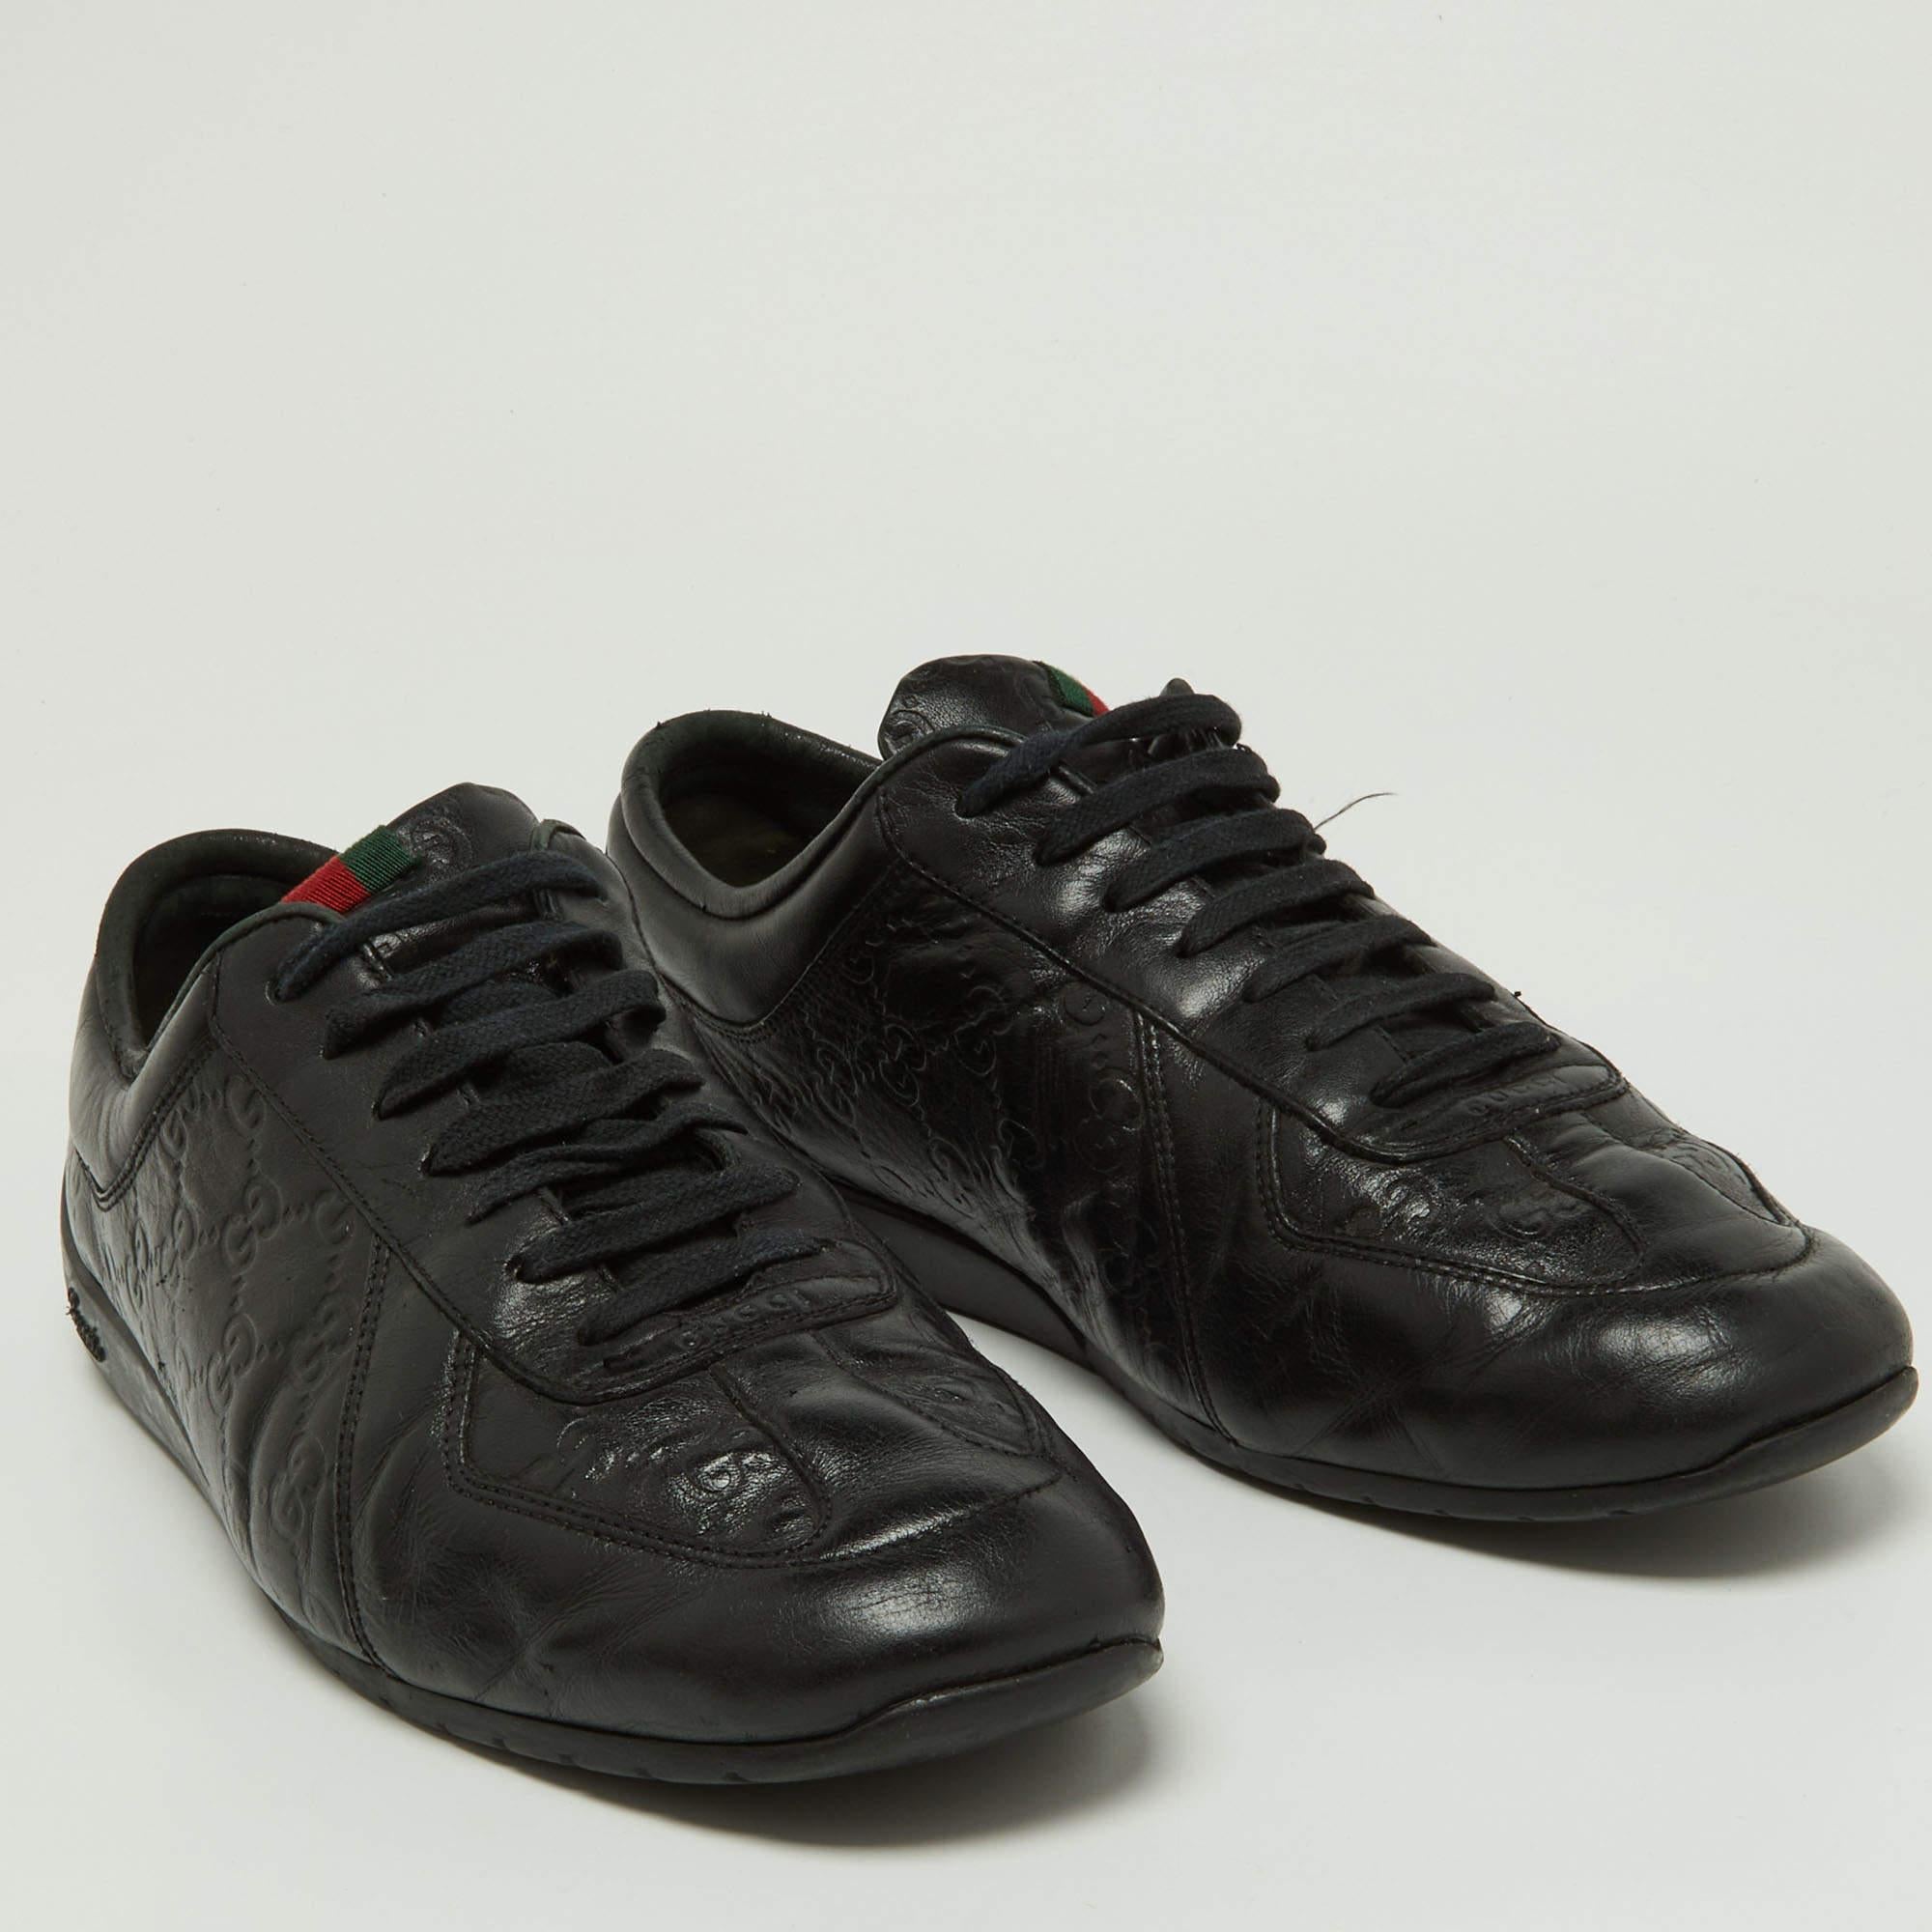 Gucci Black Guccissima Leather Low Top Sneakers Size 44.5 For Sale 4